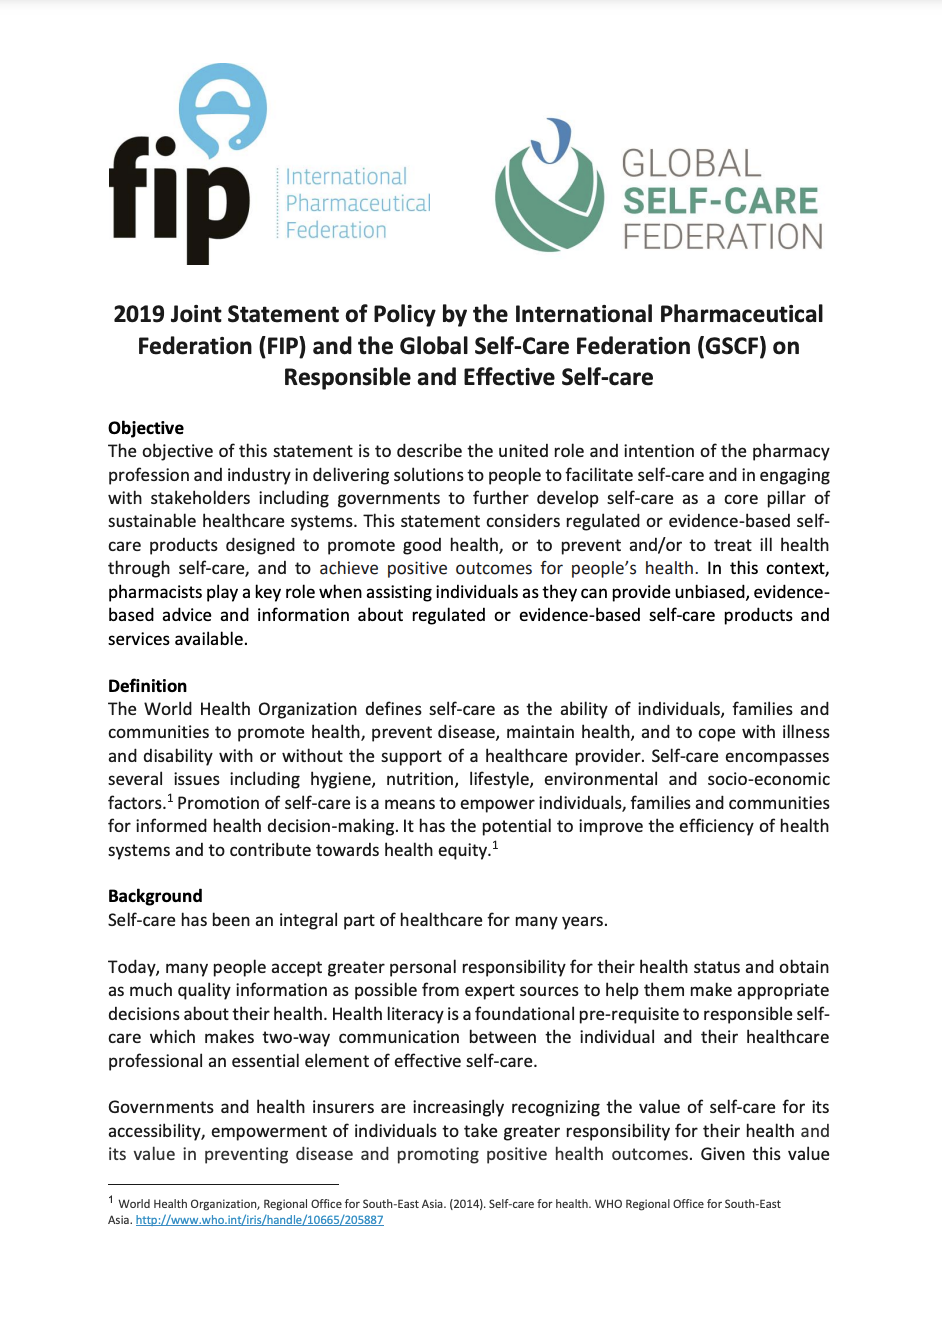 Joint Statement of Policy by the International Pharmaceutical Federation (FIP) and the Global Self-Care Federation (GSCF) on Responsible and Effective Self-care (2019) Thumbnail